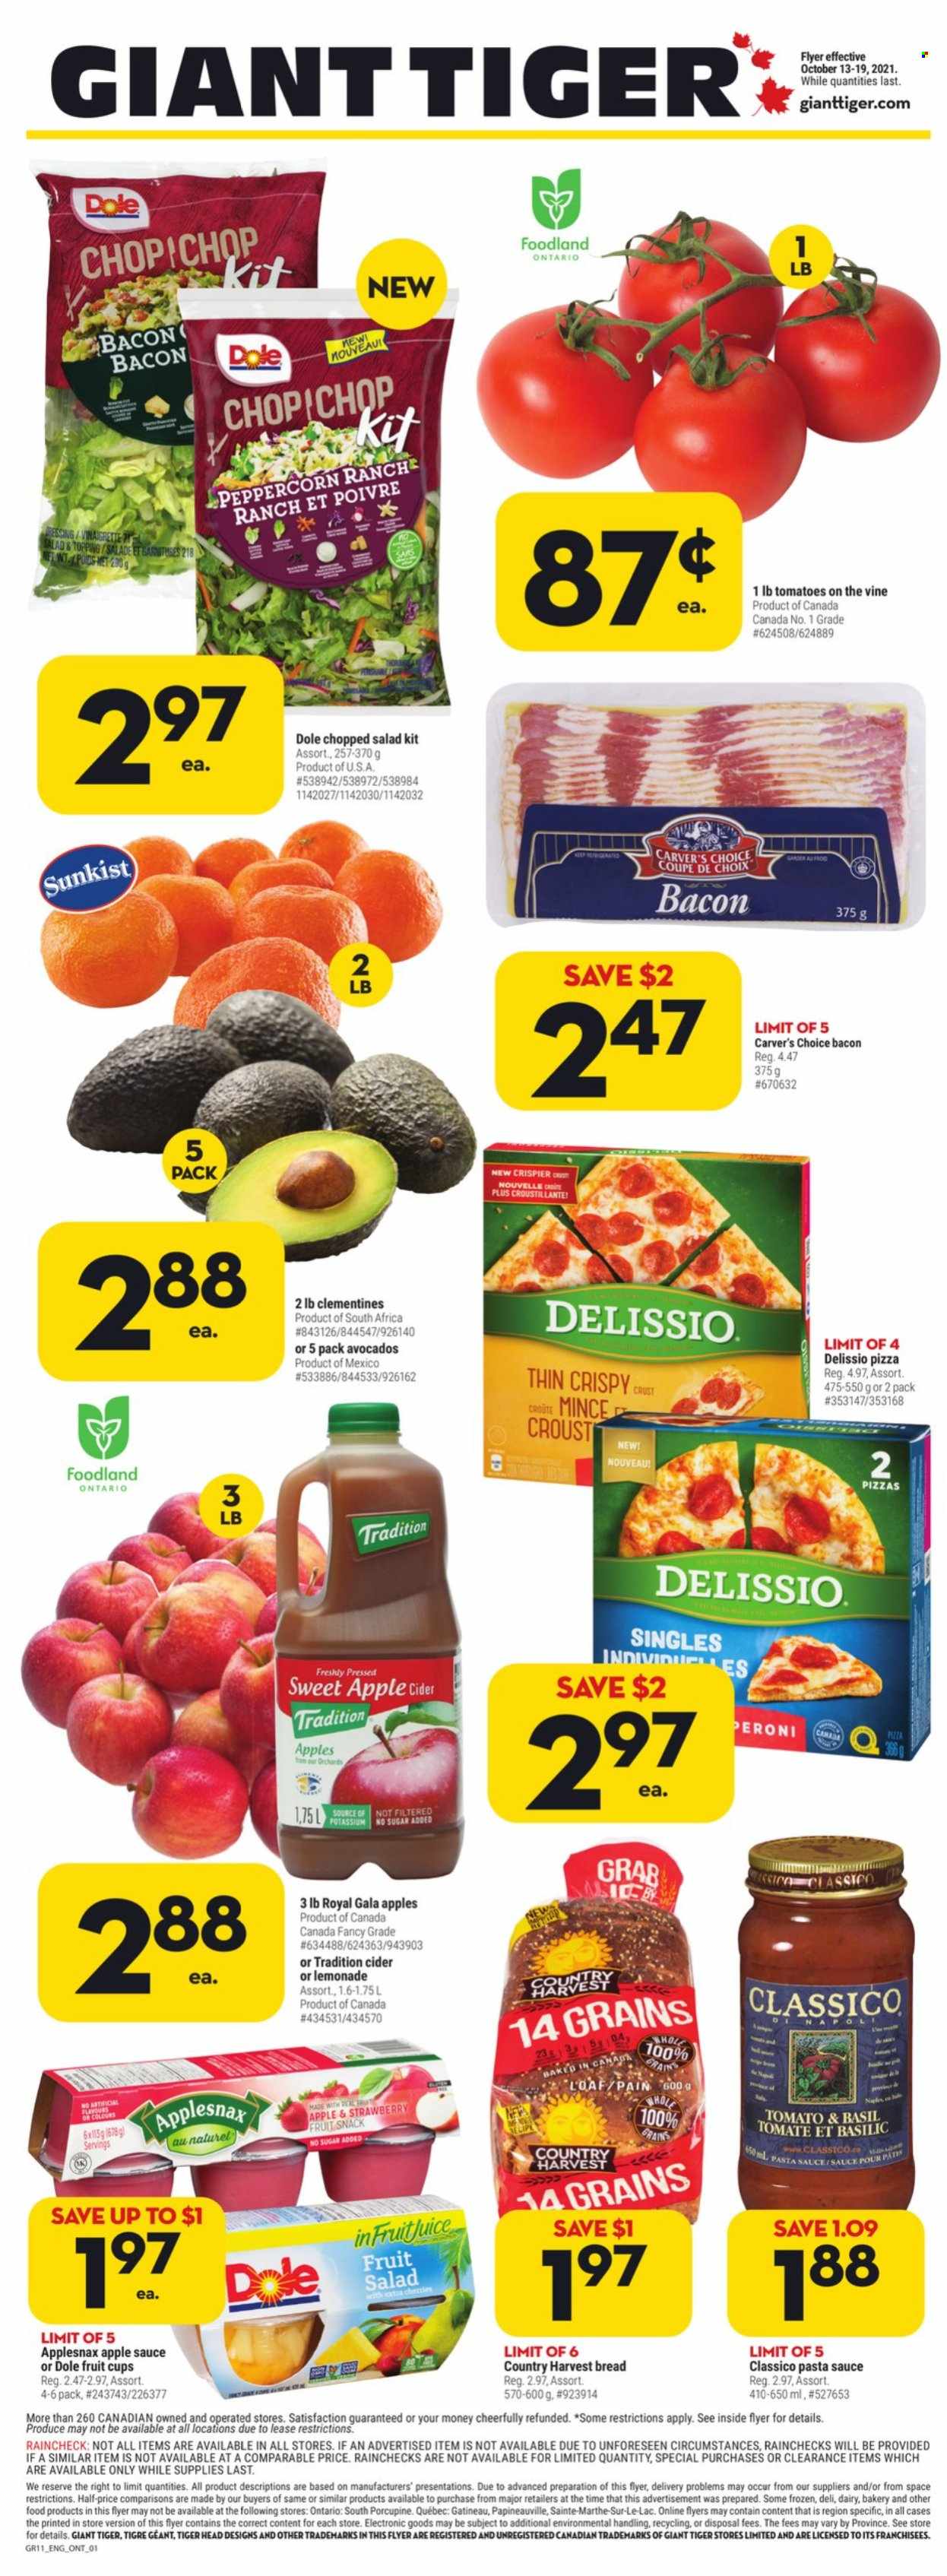 thumbnail - Giant Tiger Flyer - October 13, 2021 - October 19, 2021 - Sales products - bread, salad, Dole, chopped salad, avocado, clementines, Gala, fruit cup, pizza, pasta sauce, bacon, Country Harvest, snack, fruit snack, fruit salad, vinaigrette dressing, Classico, apple sauce, lemonade, cider, Peroni. Page 1.